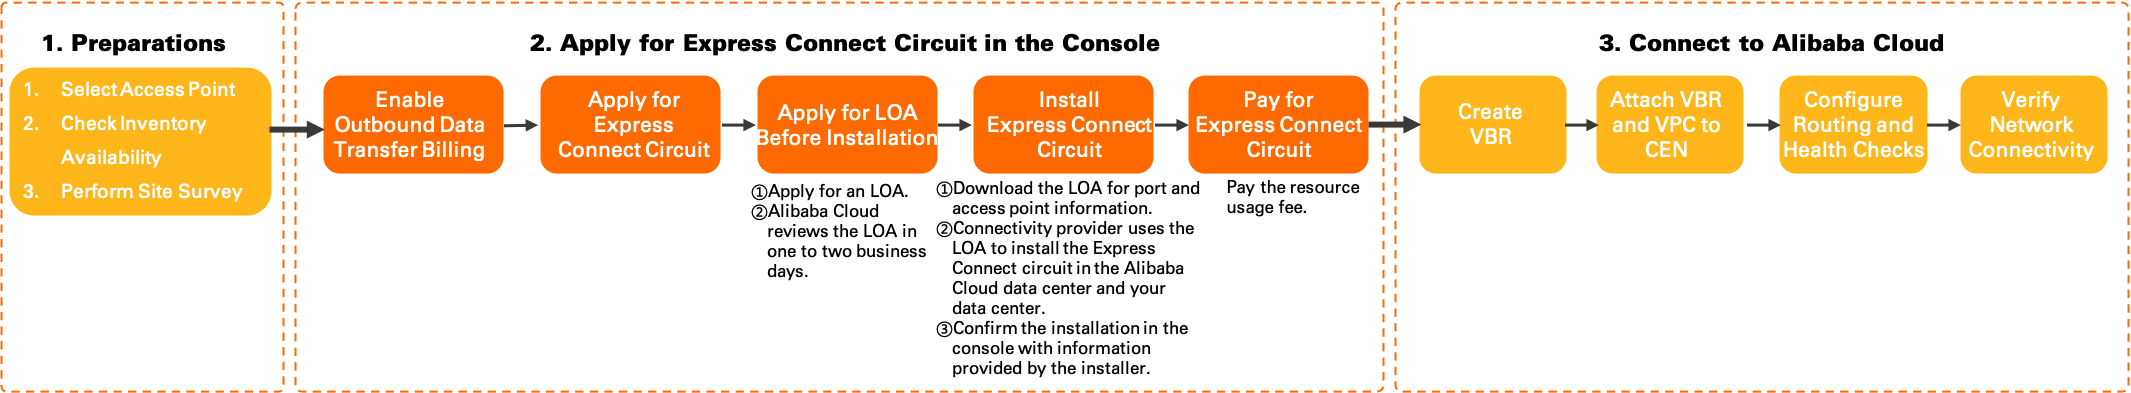 Workflow of connecting to Alibaba Cloud through a dedicated Express Connect circuit